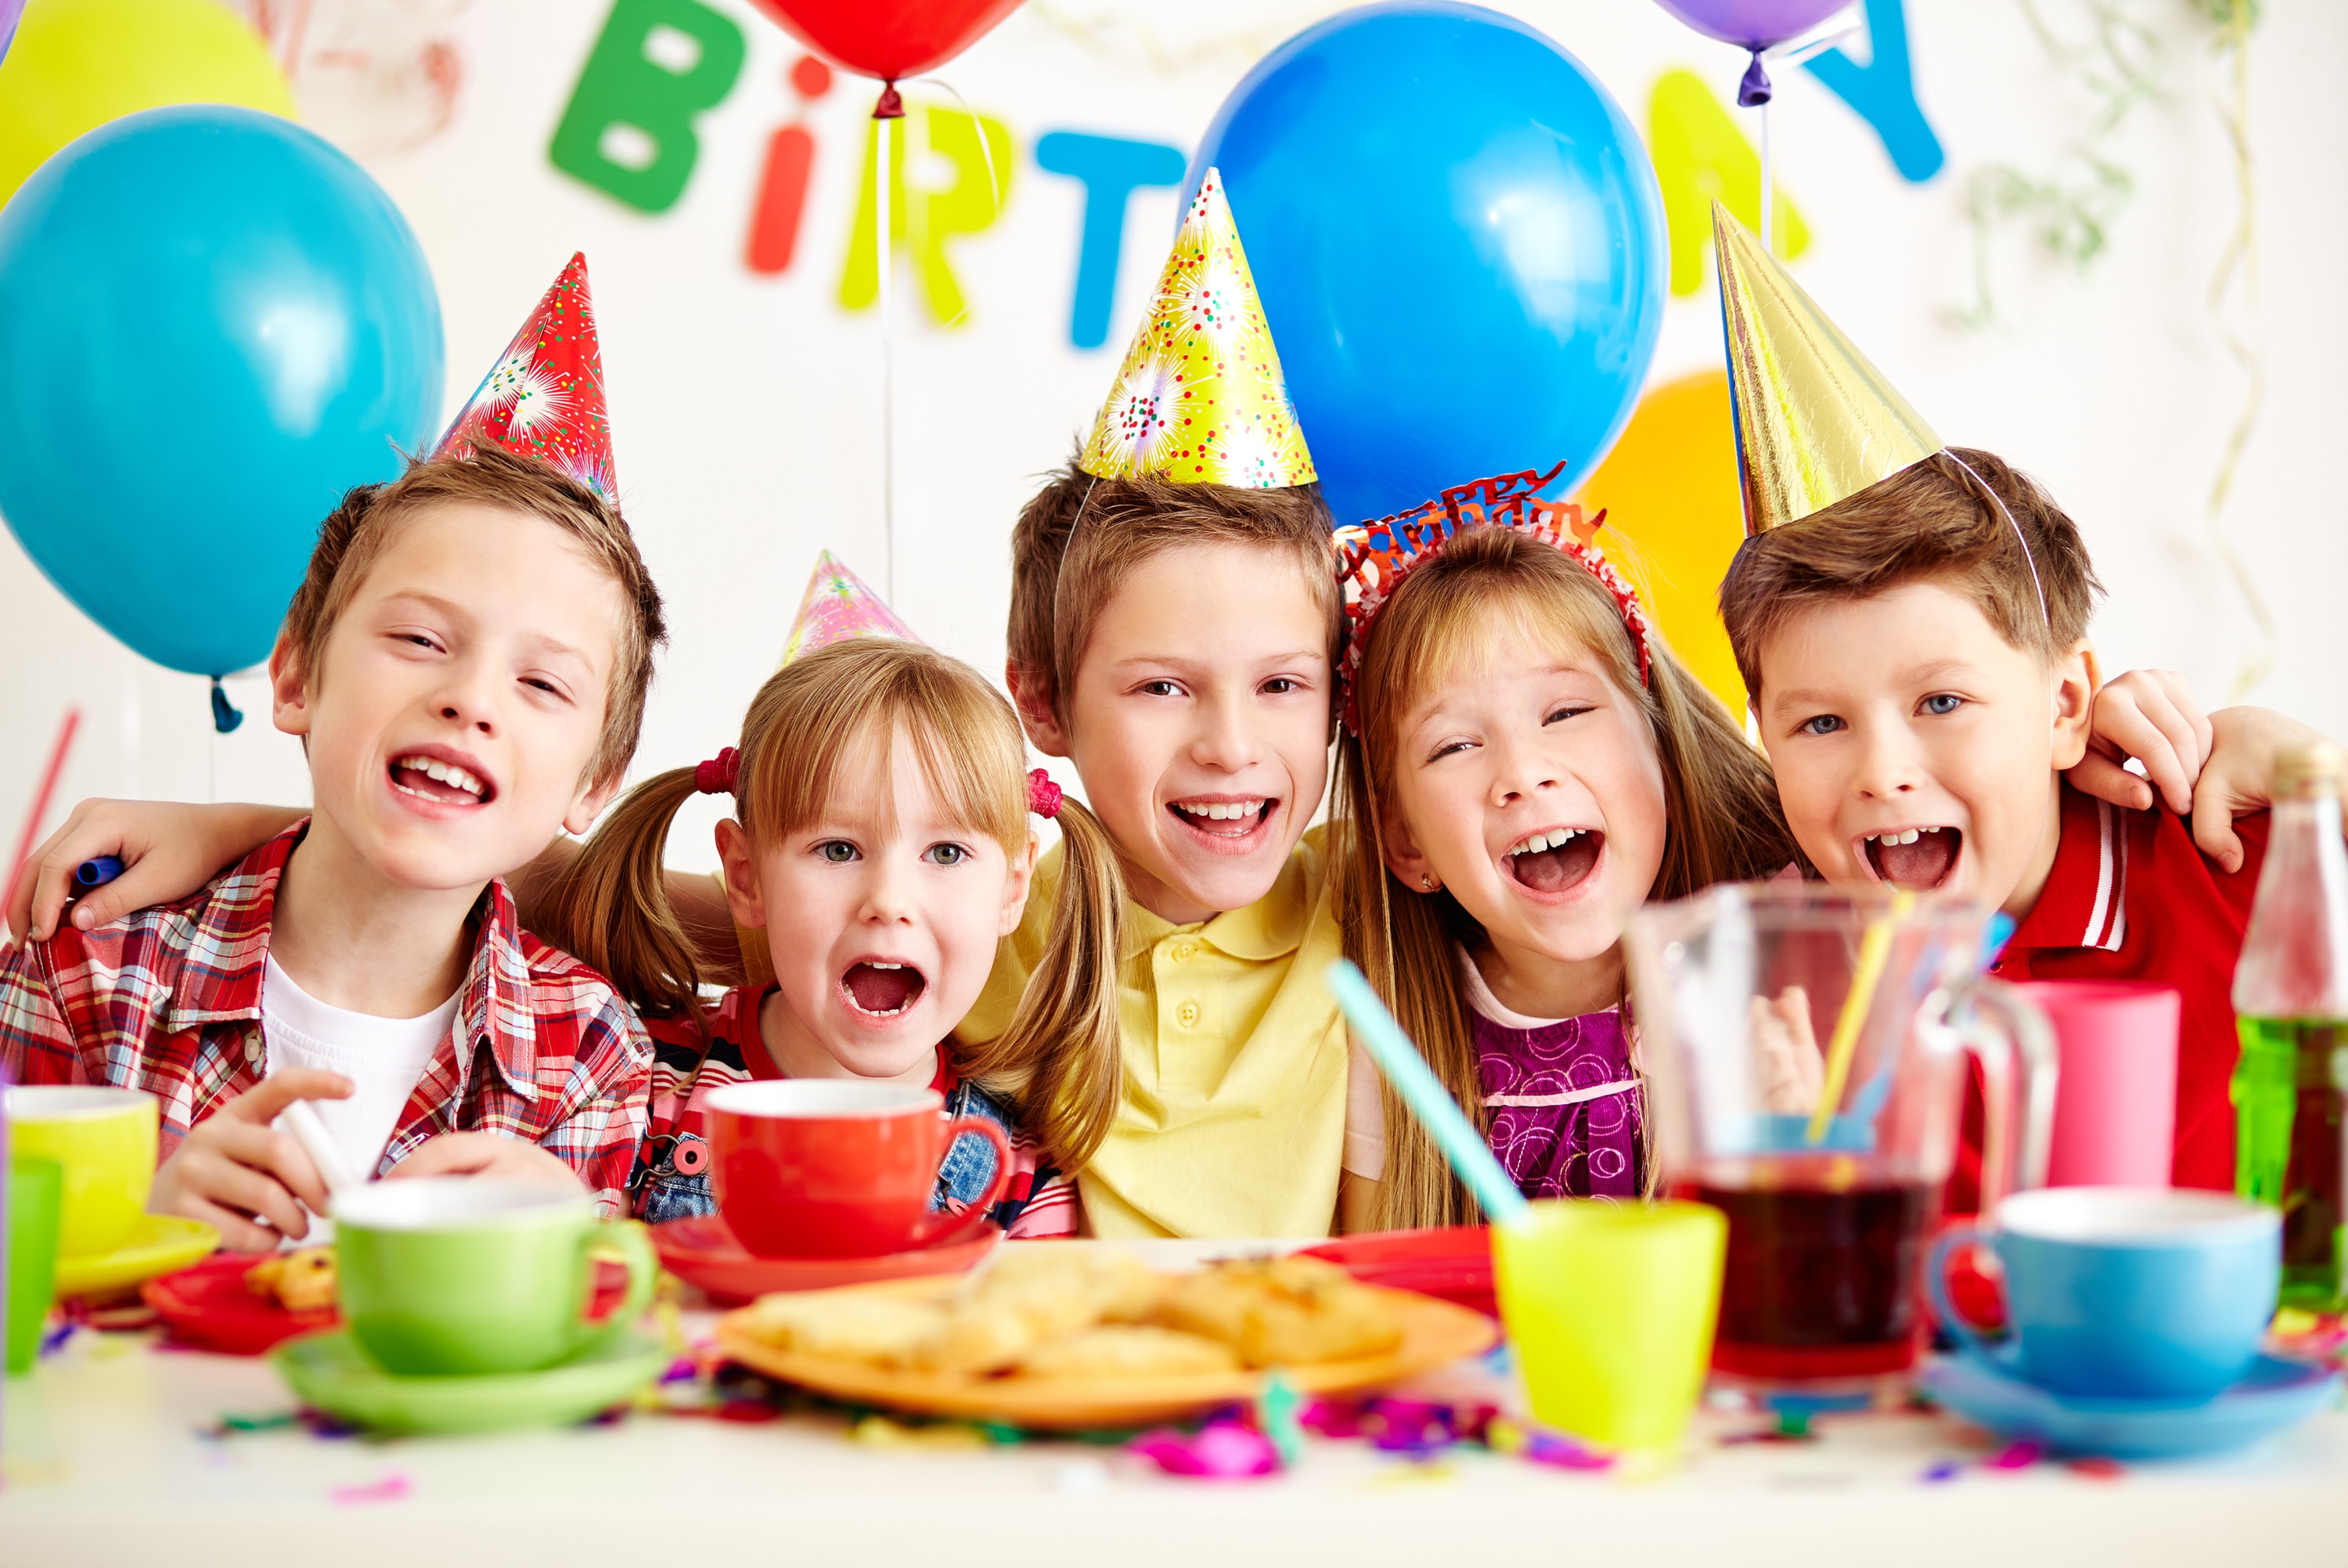 Unique Birthday Party Ideas That Young Kids and Parents Will Love